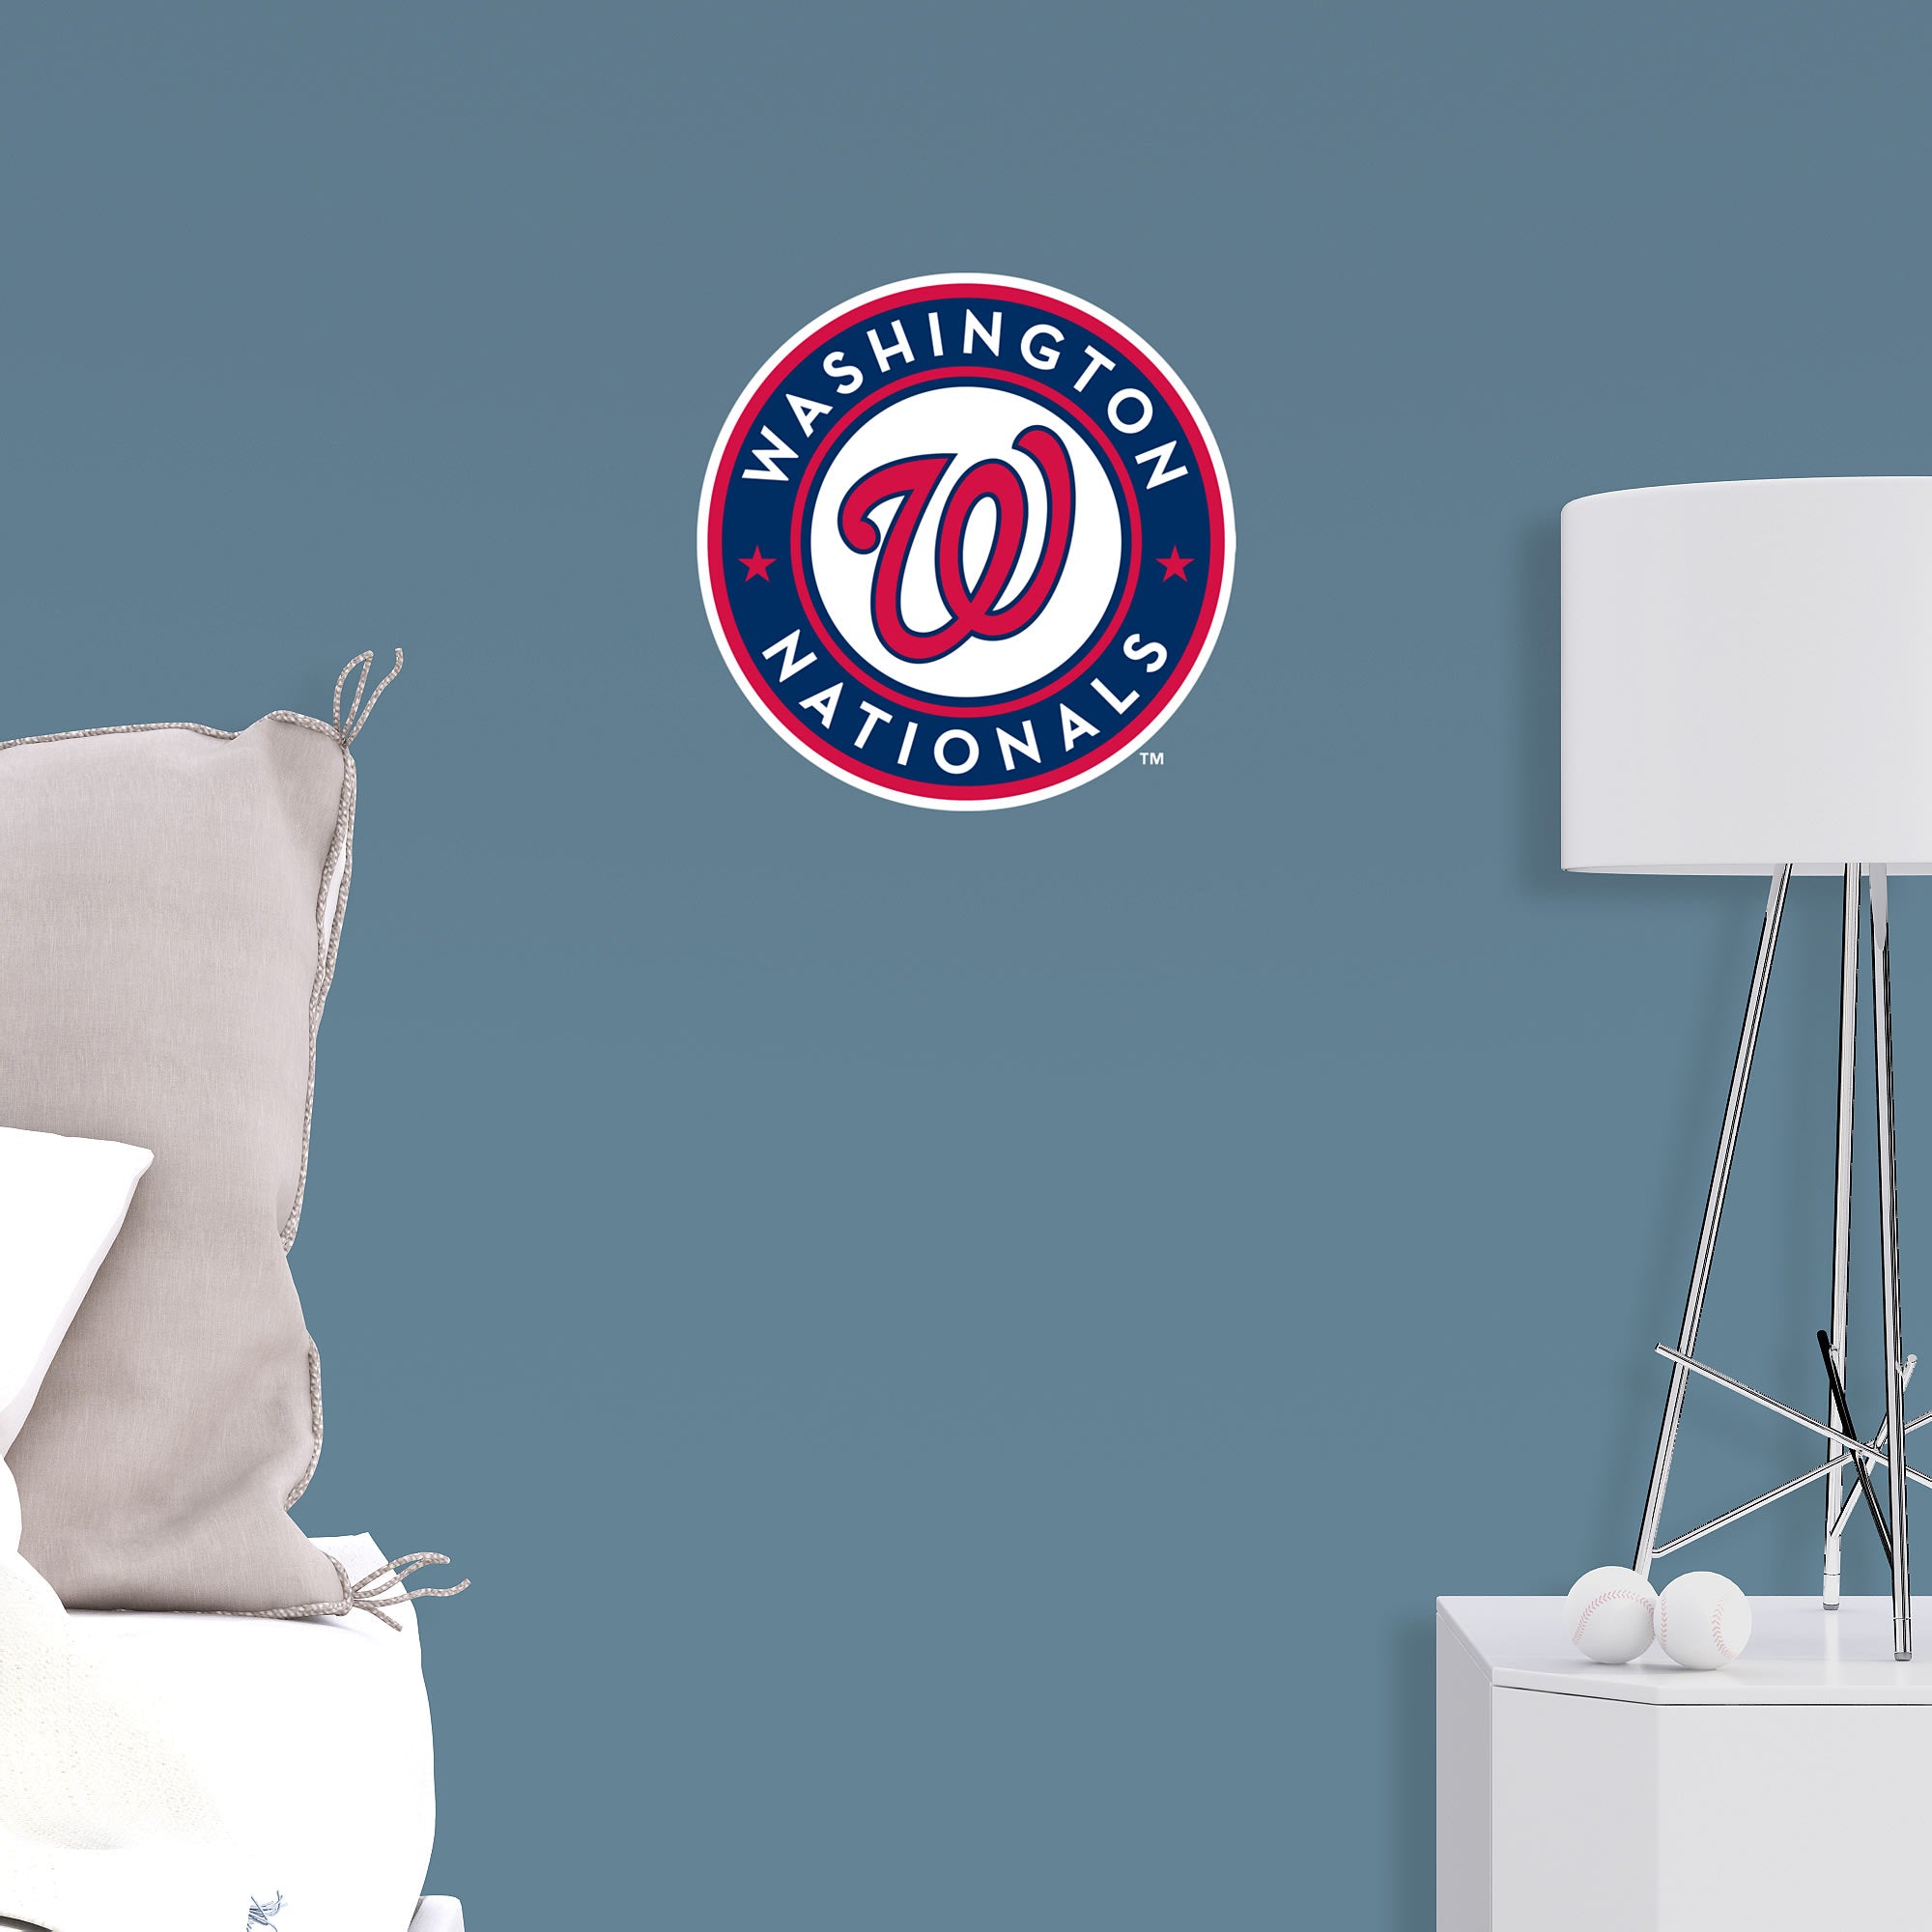 Washington Nationals: Logo - Officially Licensed MLB Removable Wall Decal Large by Fathead | Vinyl